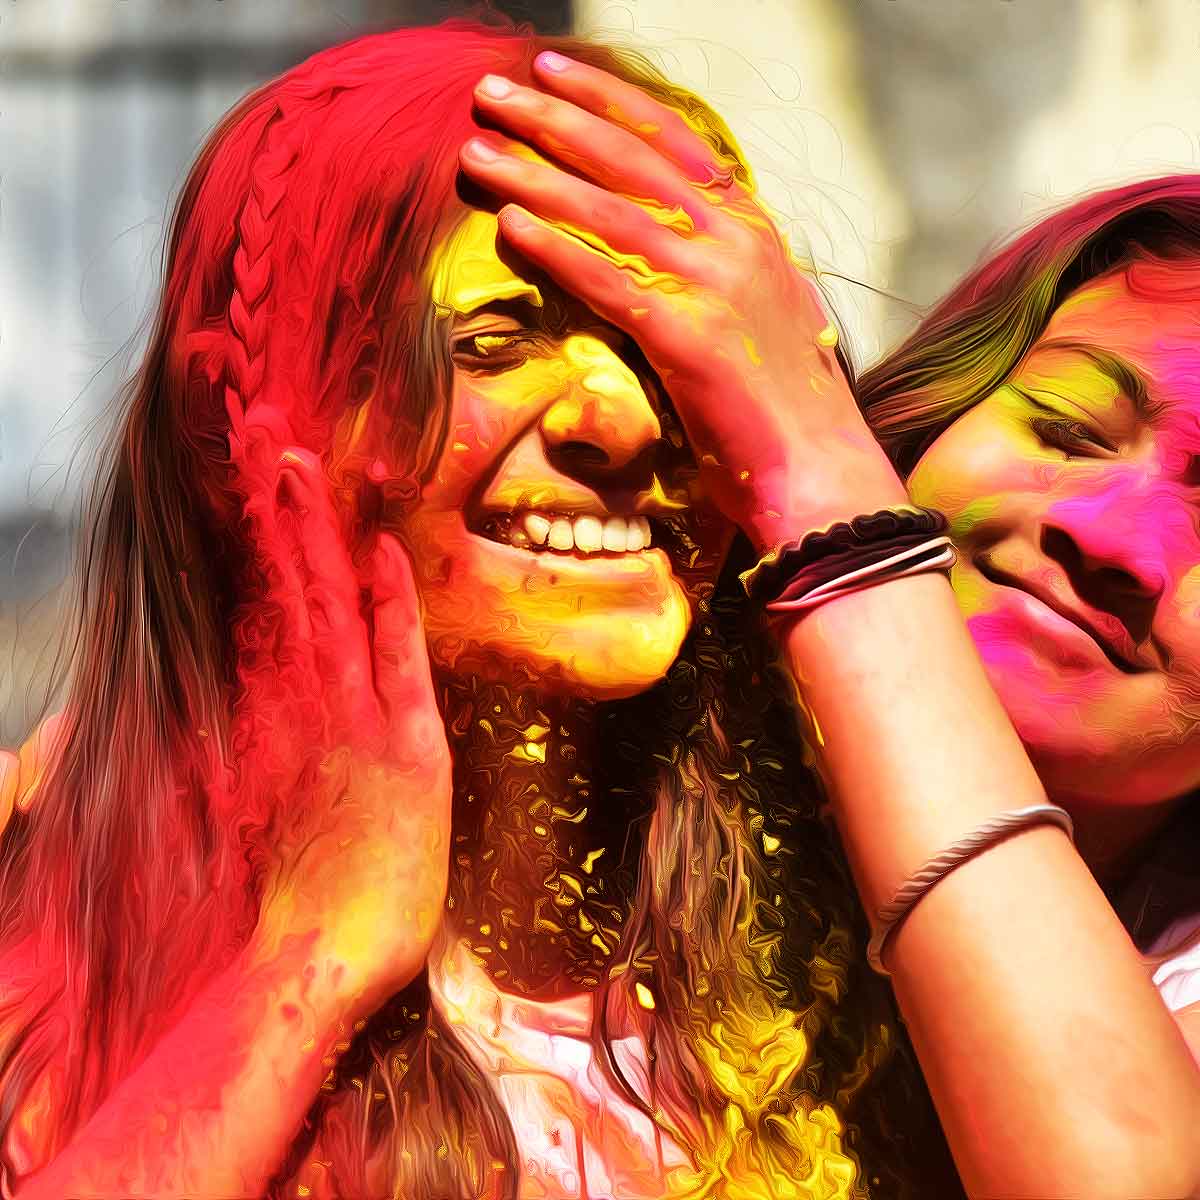 Shot Woman Posing During Holi Festival Stock Footage Video (100%  Royalty-free) 4333688 | Shutterstock